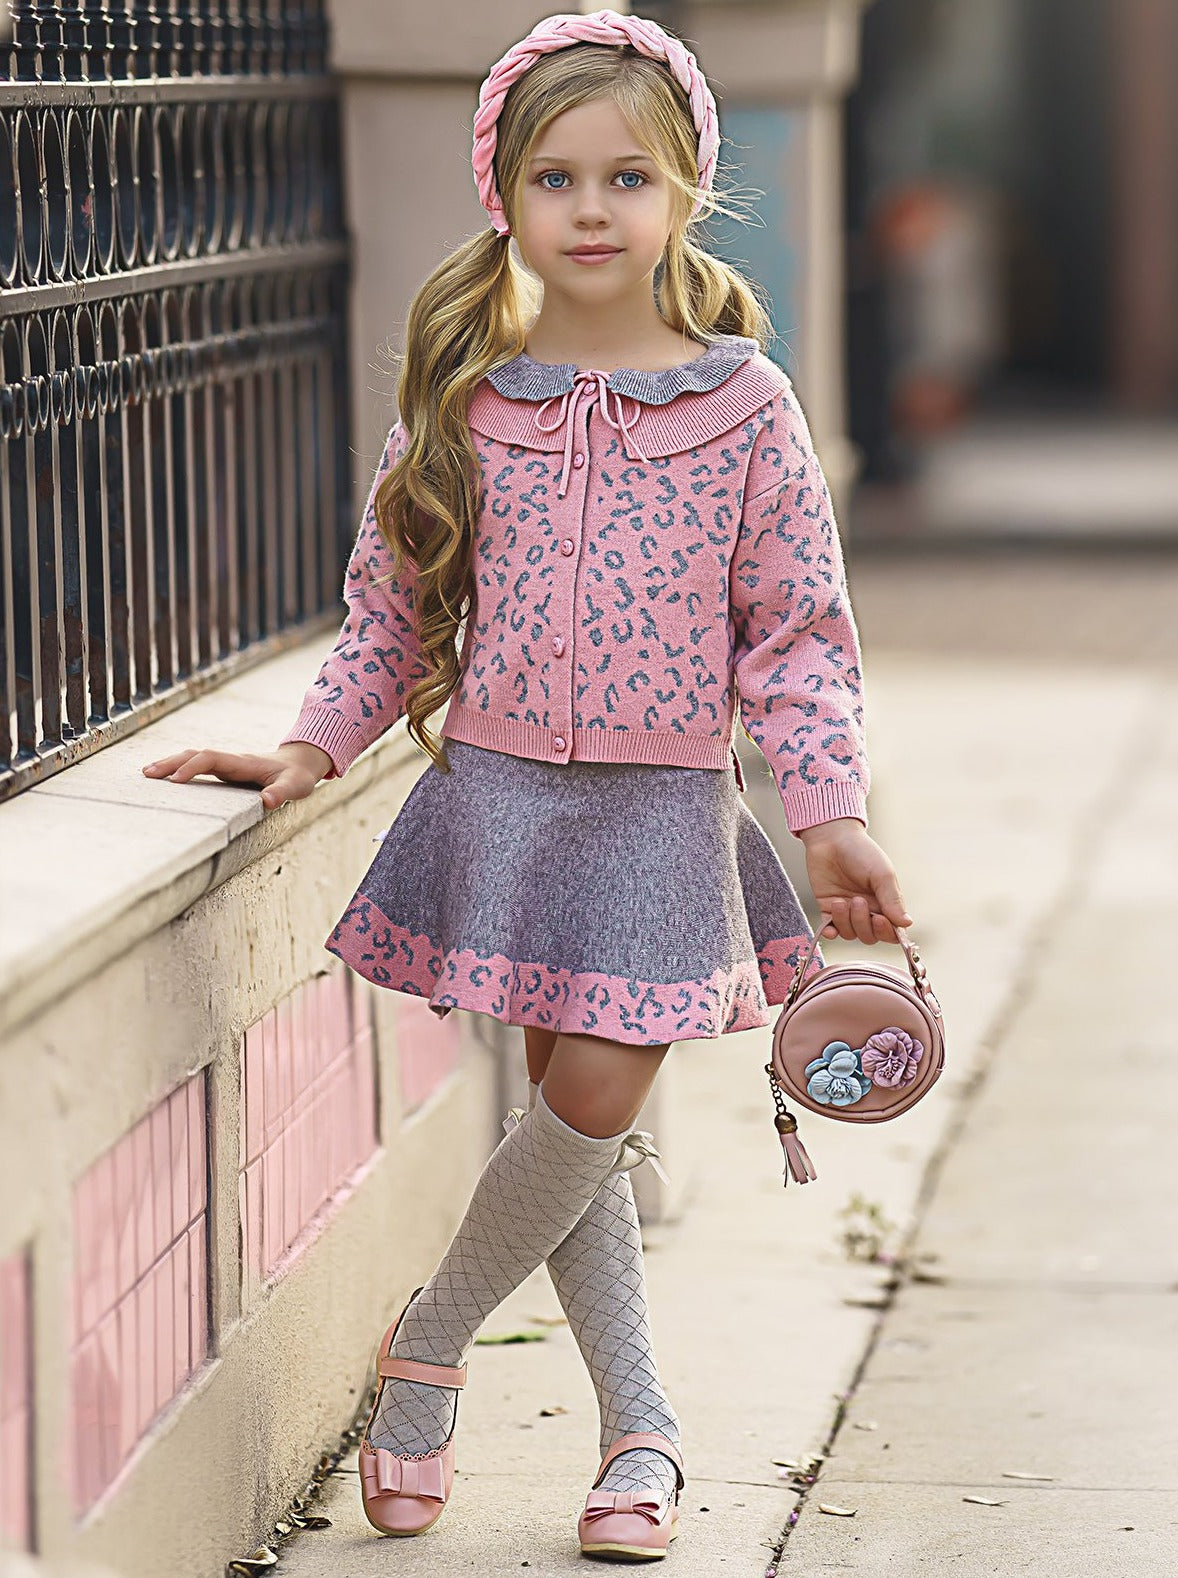 Mia Belle Baby - Stepping Out in Style in Unique Clothes for Girls